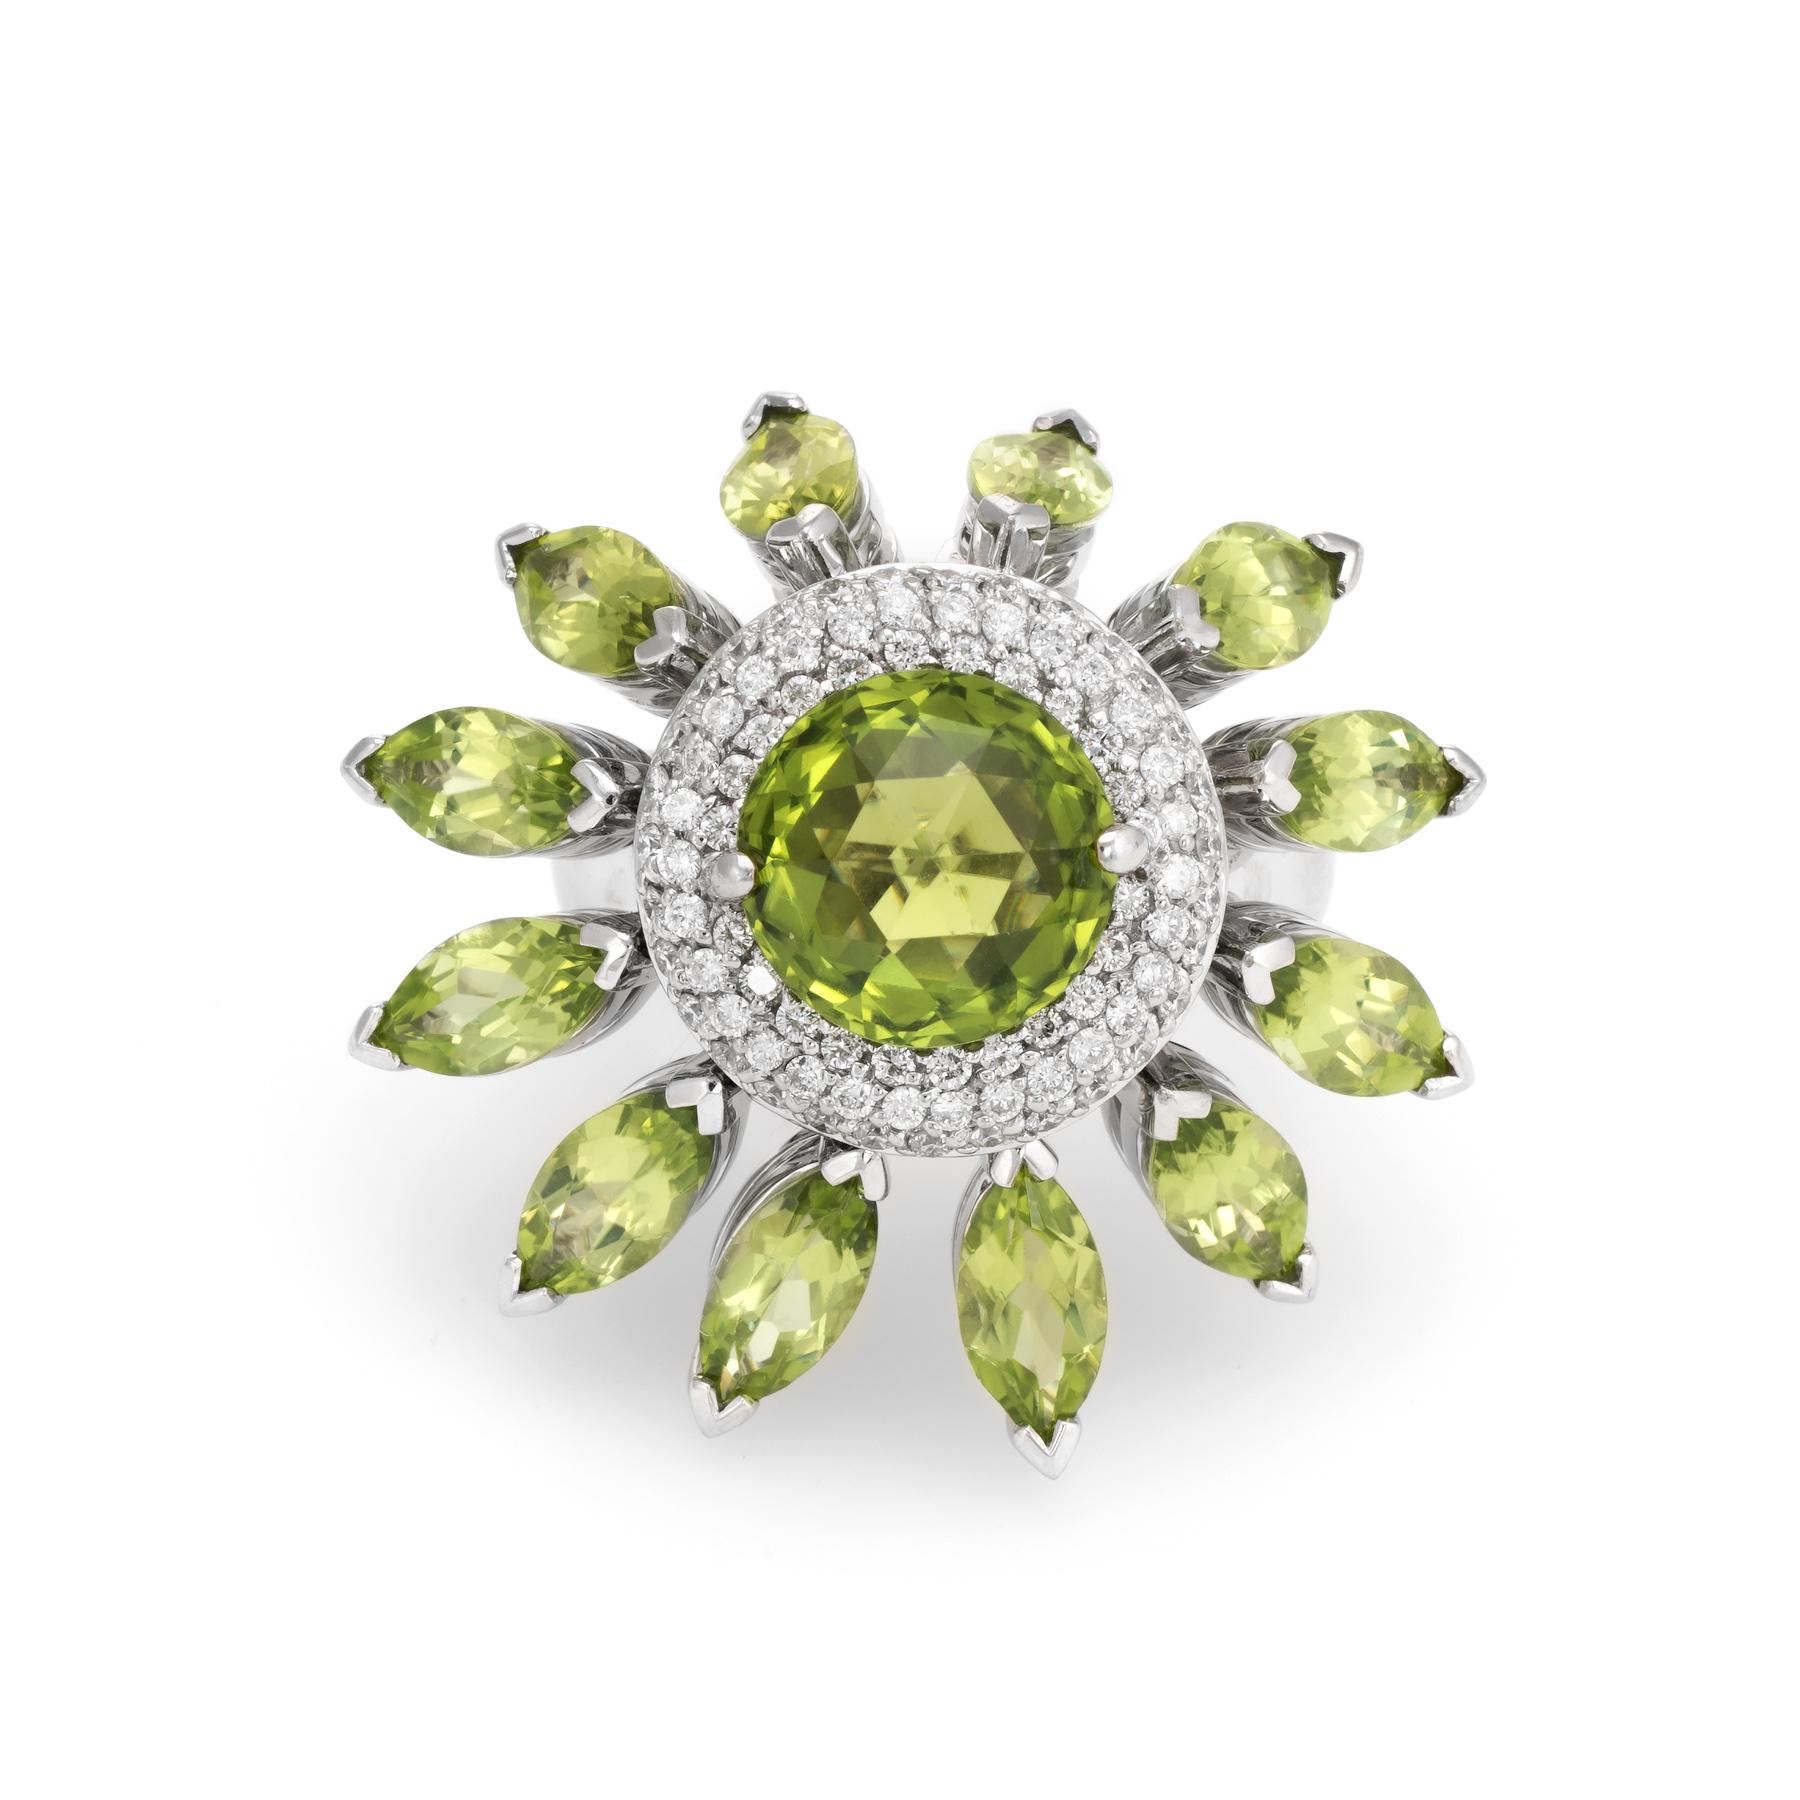 Finely detailed vintage cocktail ring, crafted in 18 karat white gold. 

Centrally mounted checkerboard faceted peridot measures 10mm (estimated at 4.50 carats). The accenting marquise cut peridot each measures 8mm x 4mm (estimated at 0.50 carats